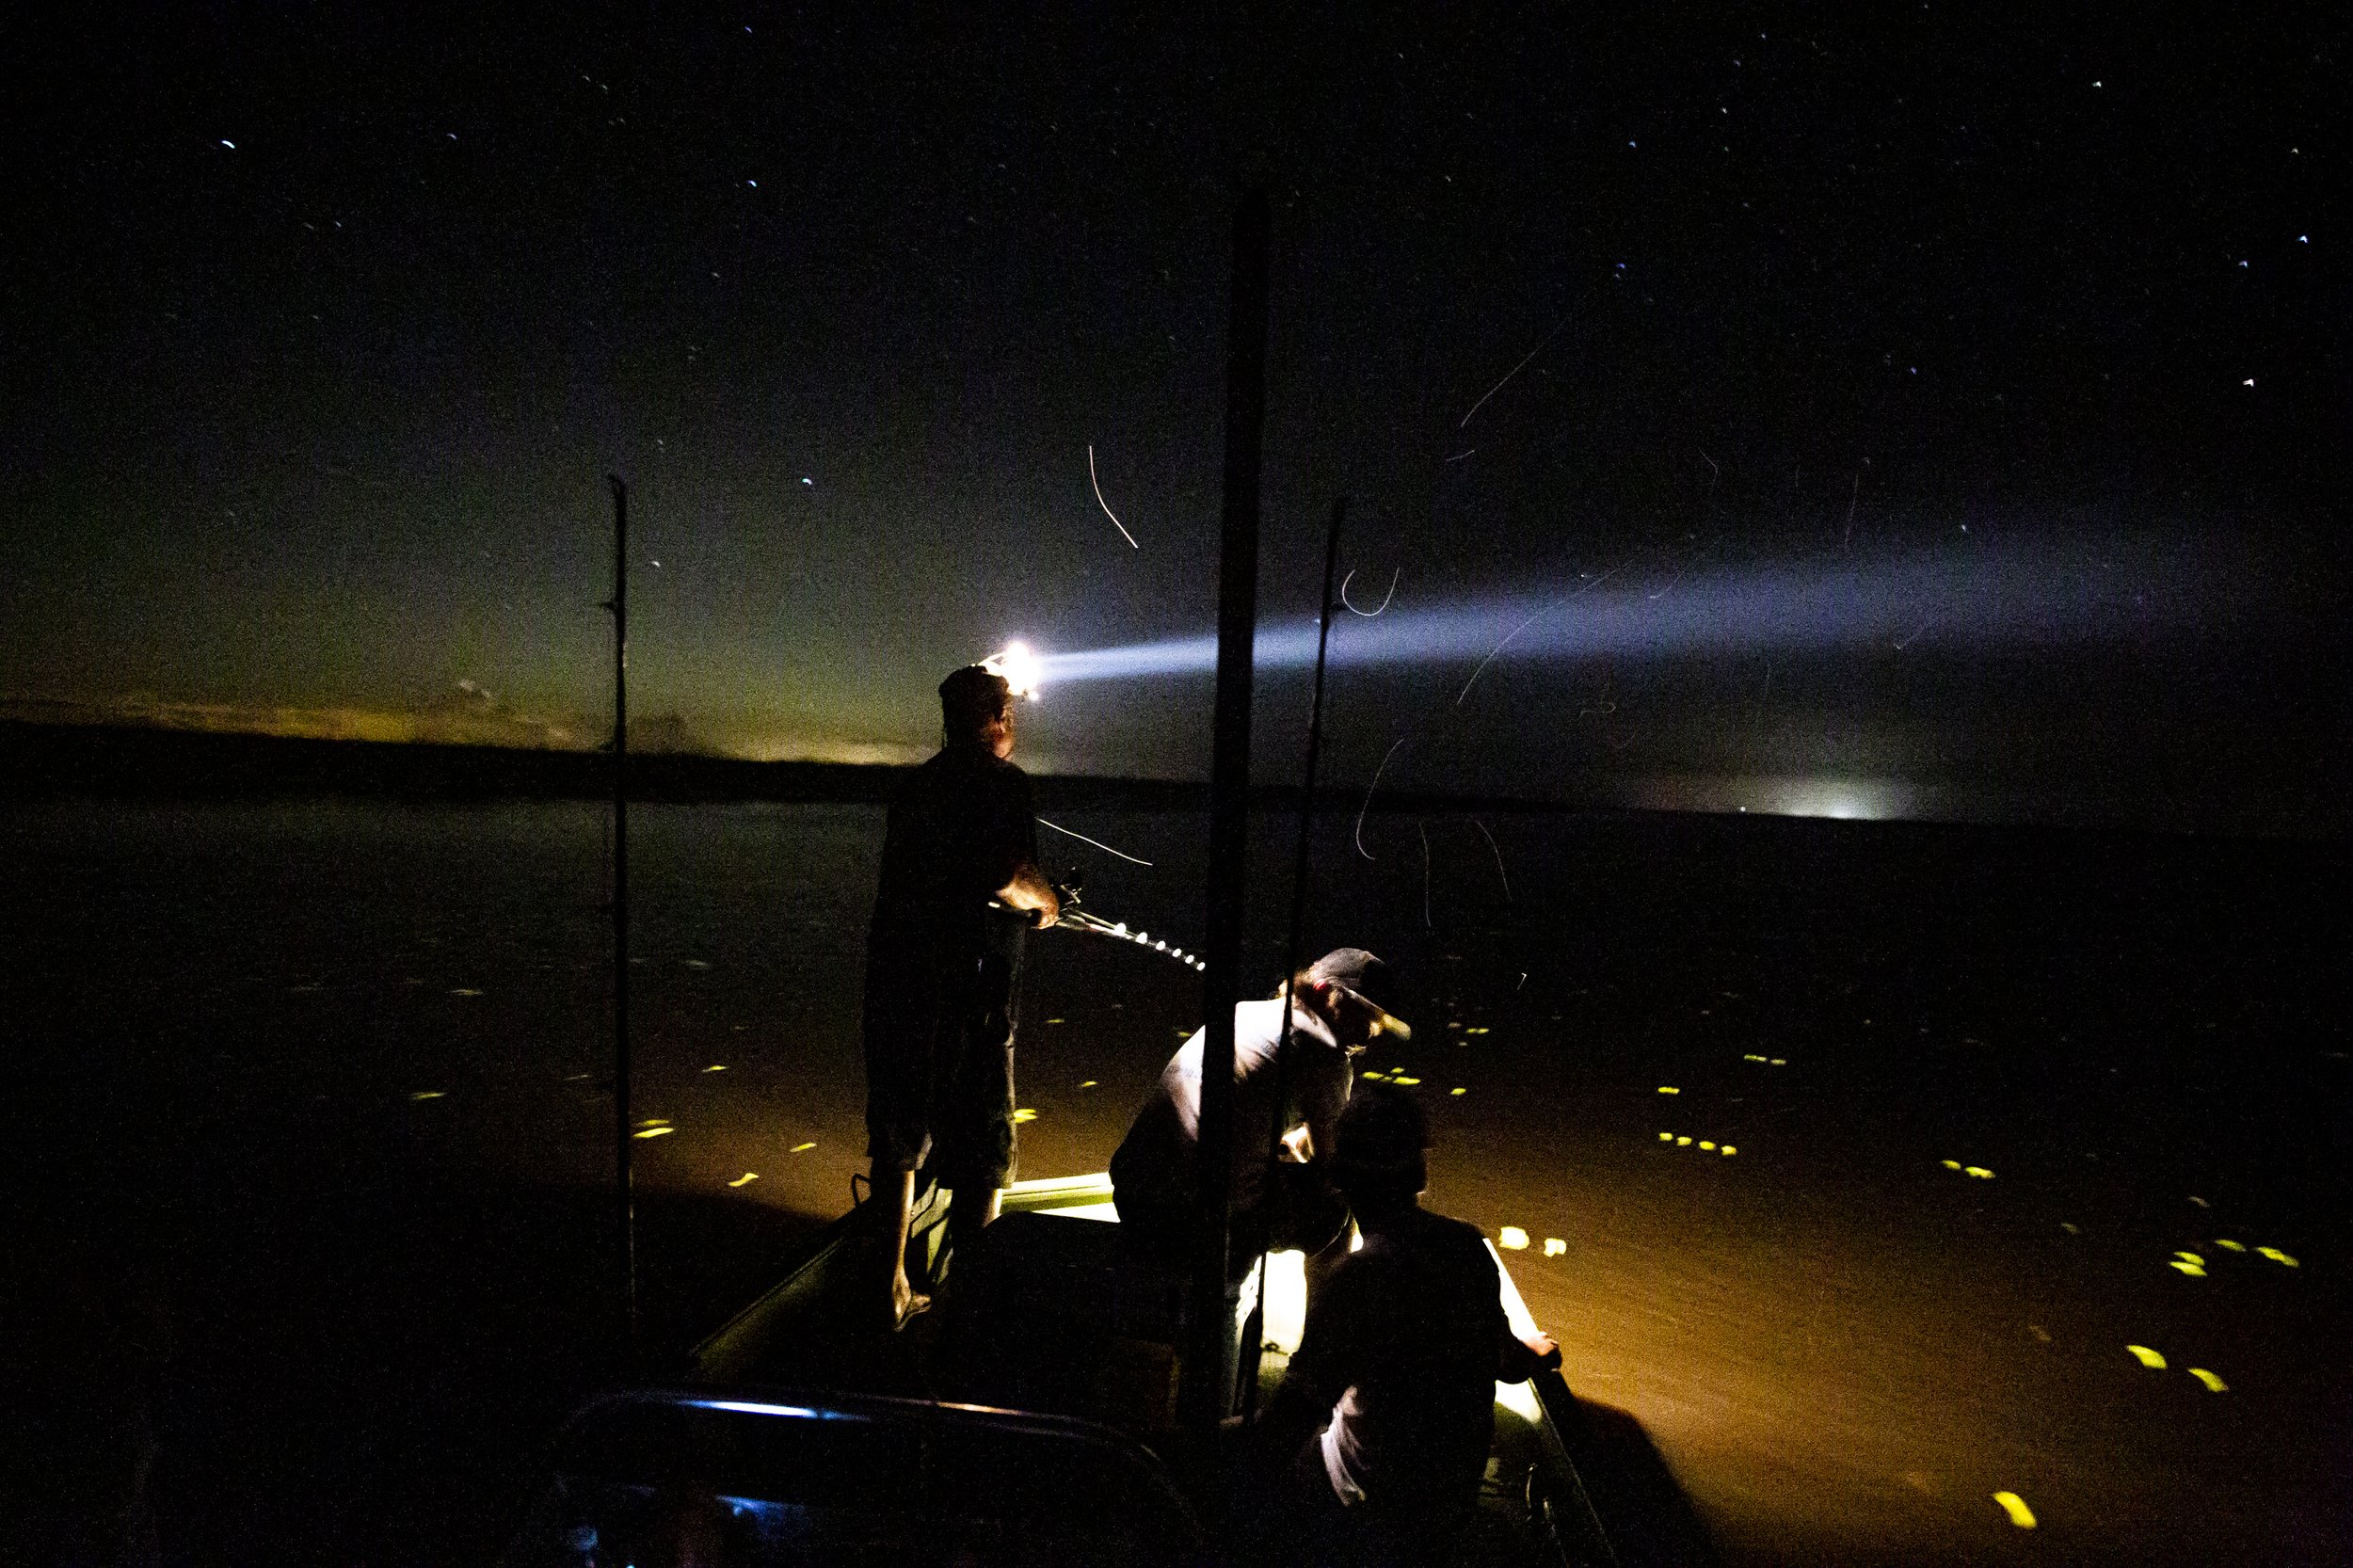  Capt. Bob Stafford shines a light out onto the water while looking for gators during a hunt with Okeechobee Charters on Lake Okeechobee Friday, Sept. 27, 2019. 